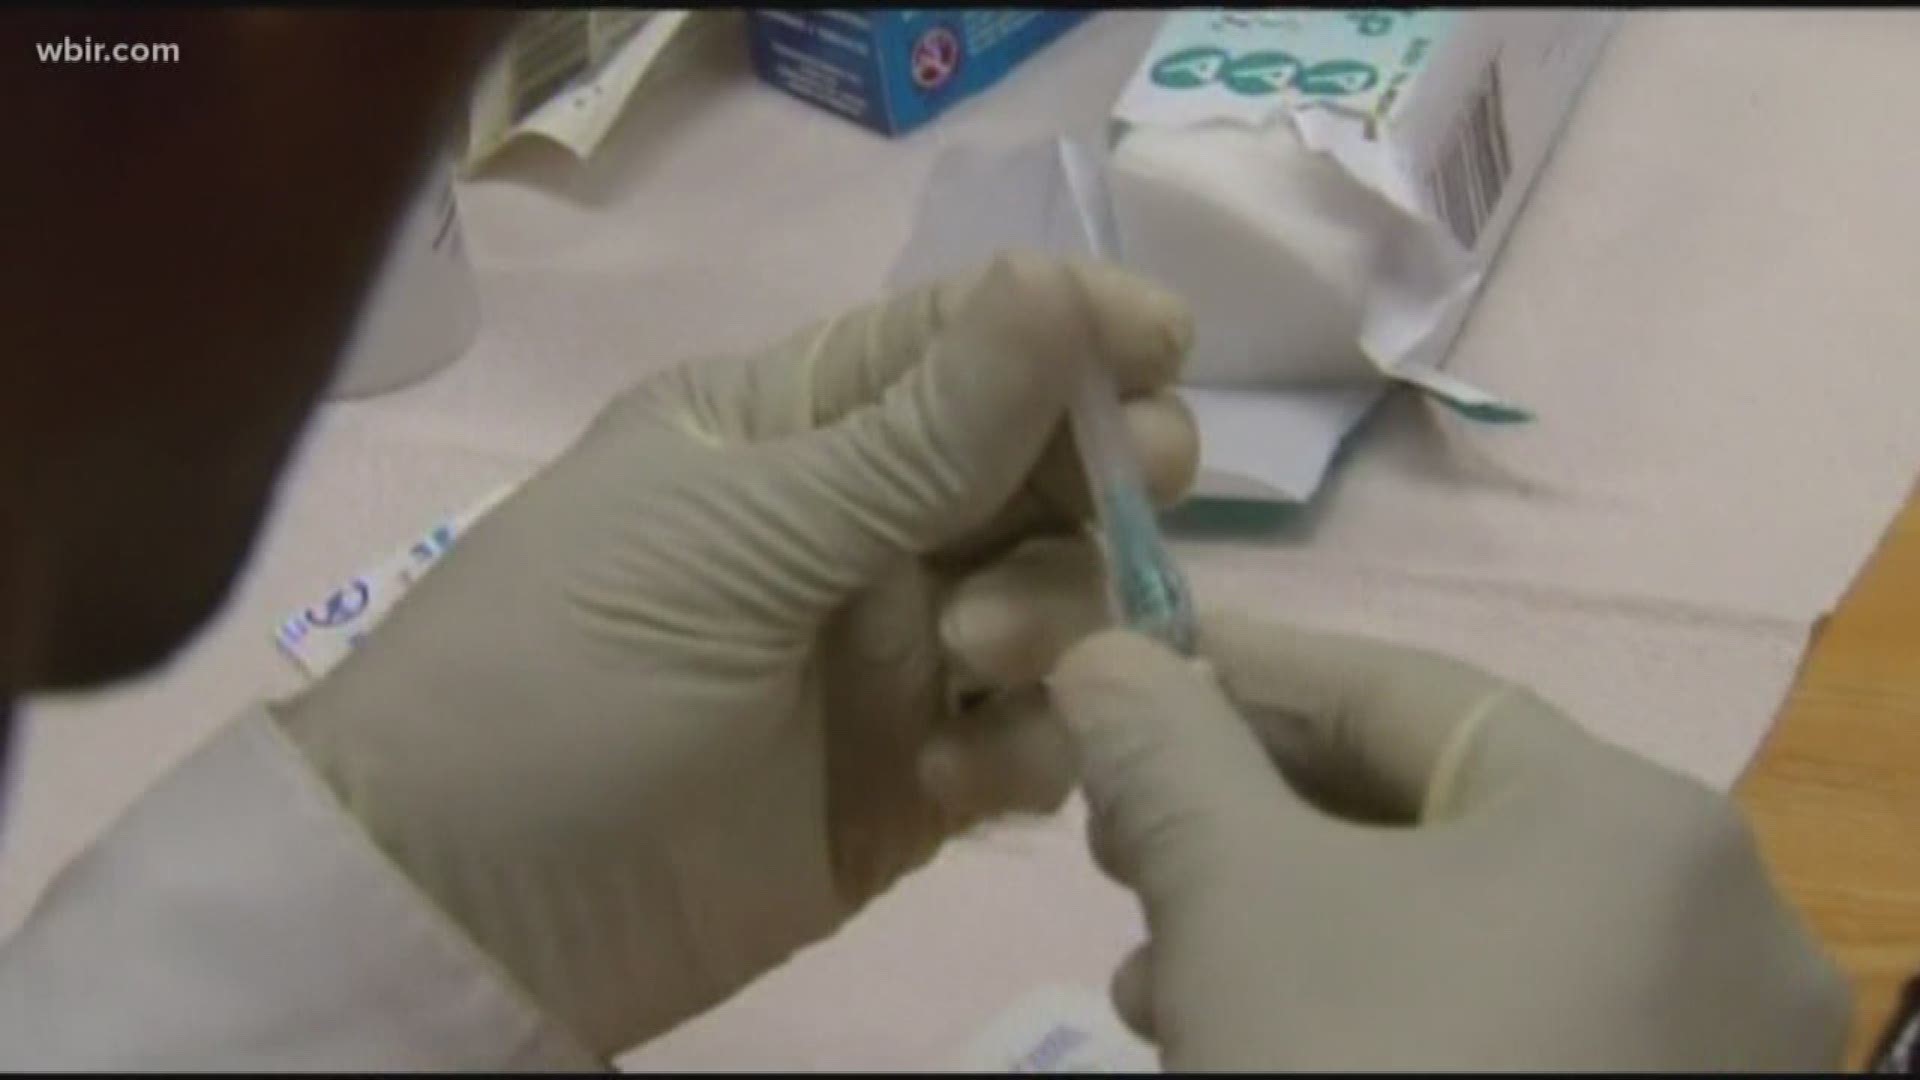 The TN Department of Health says there have been more than 1,400 cases of Hepatitis A in the state in just the last year, and nine people have died.